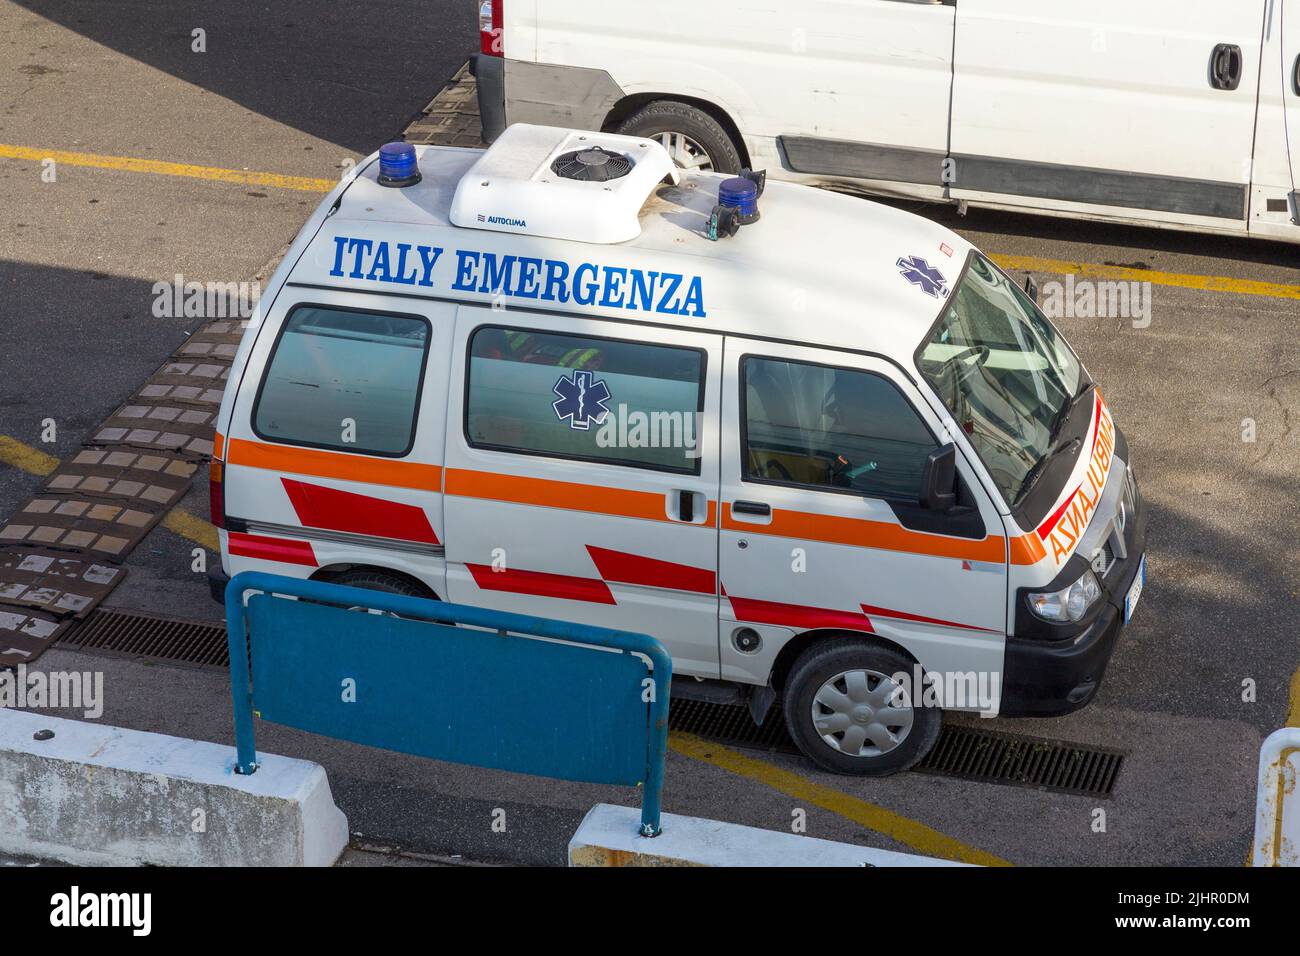 Italian Ambulance parked in the Port of Naples, Italy, Europe Stock Photo